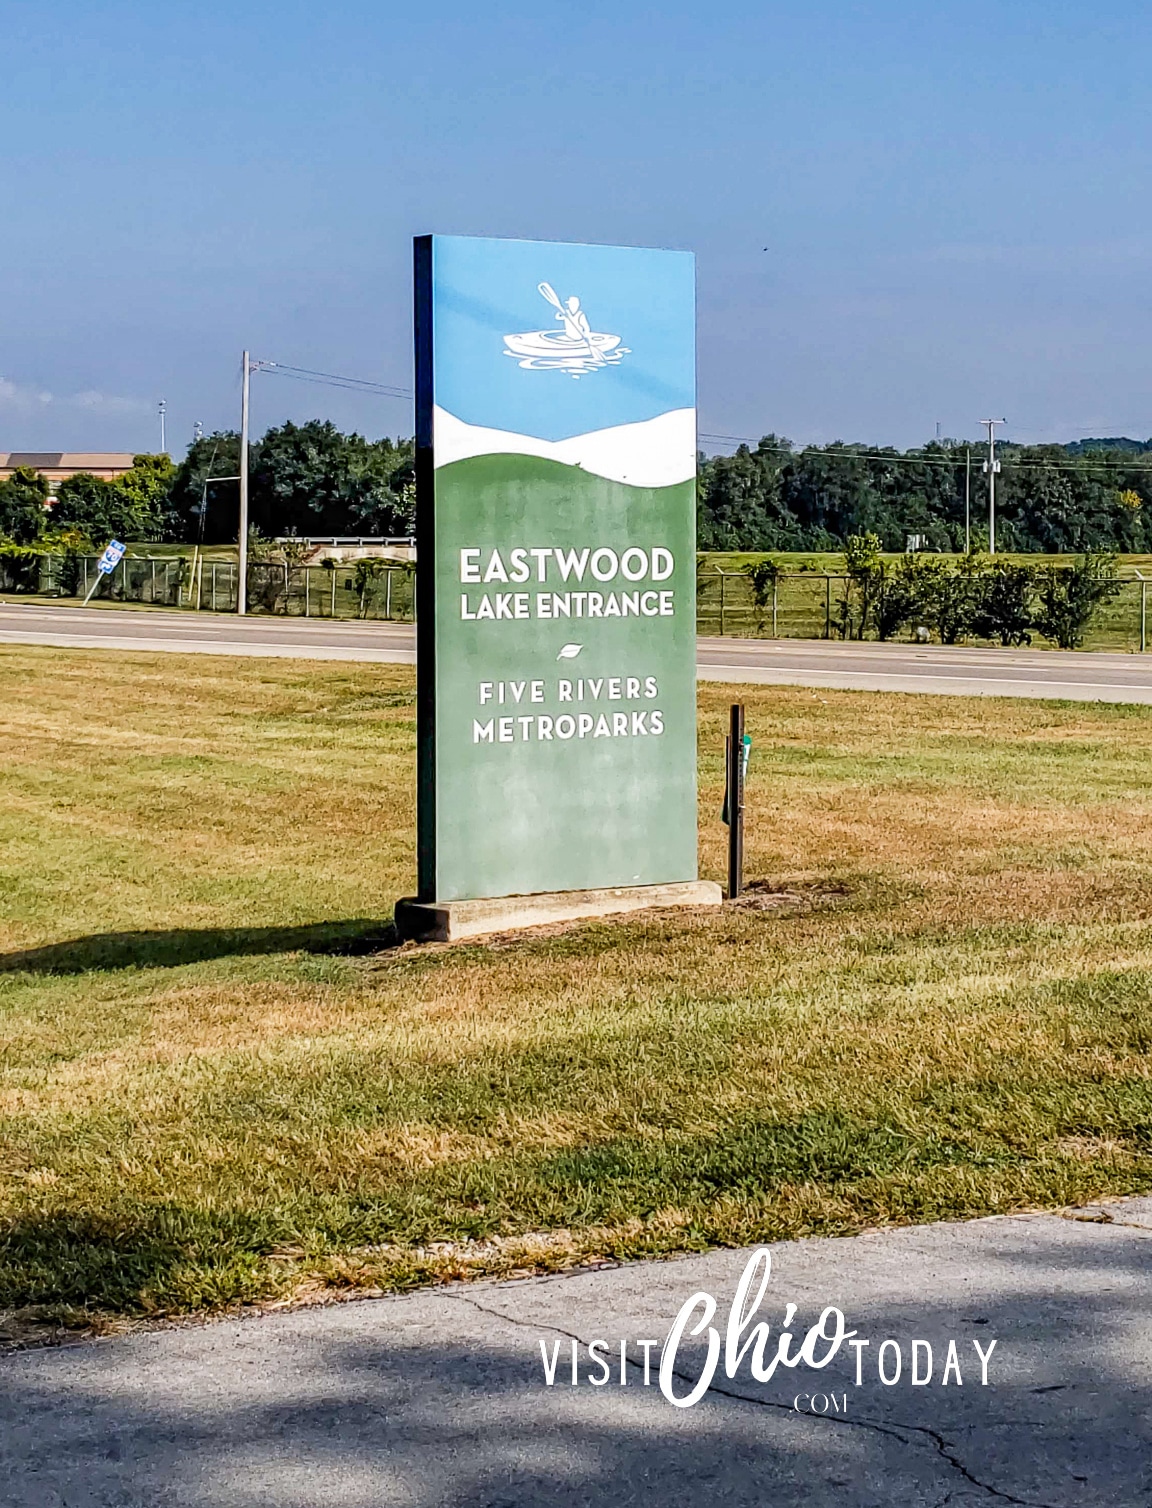 vertical photo of the entrance sign for Eastwood MetroPark. Photo credit: Cindy Gordon of VisitOhioToday.com